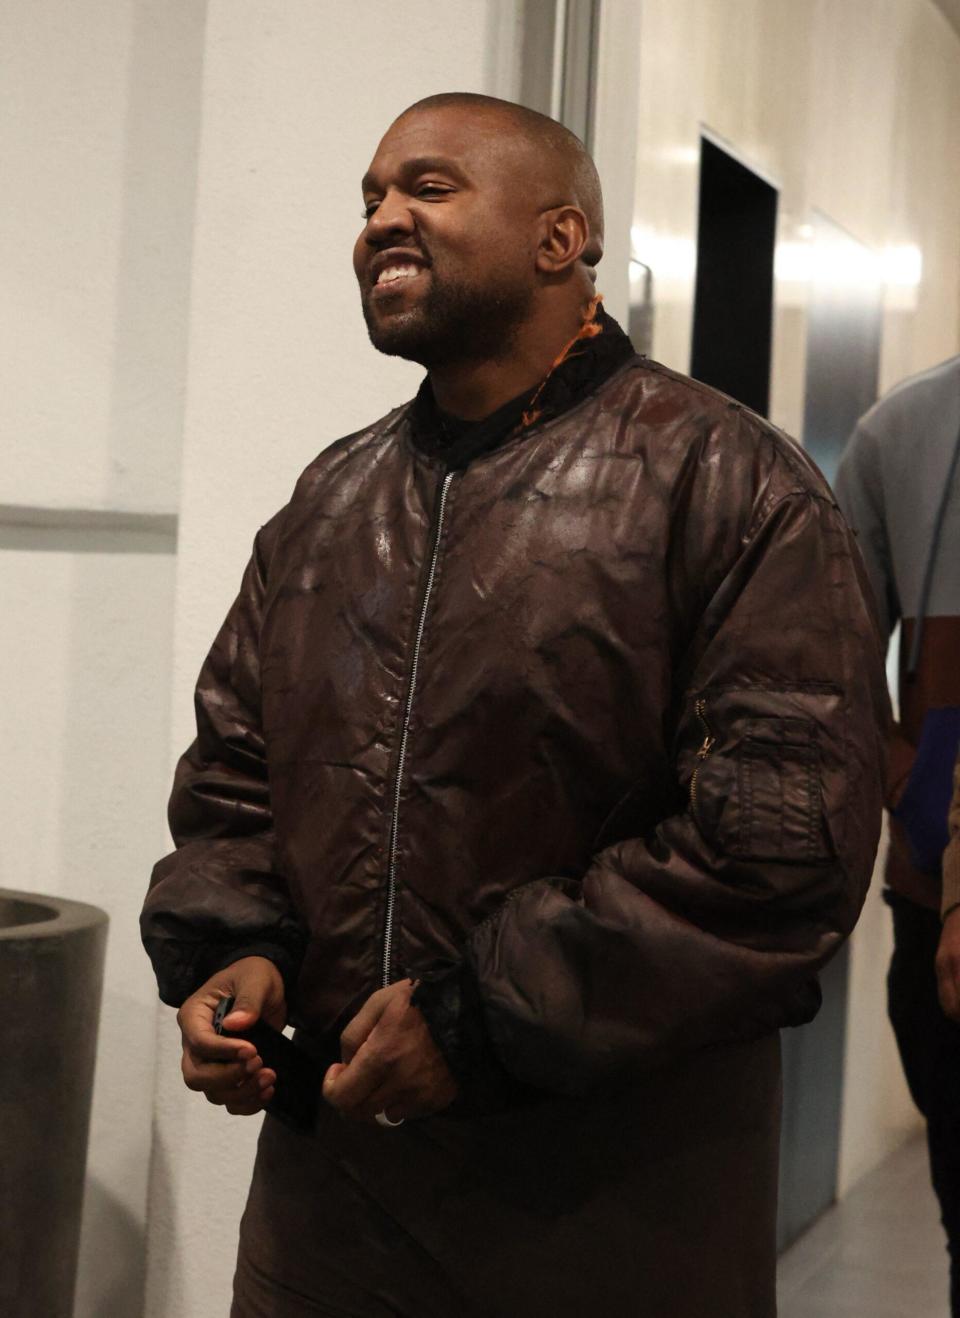 Kanye is seen leaving e.baldi restaurant smiling after having dinner with friends